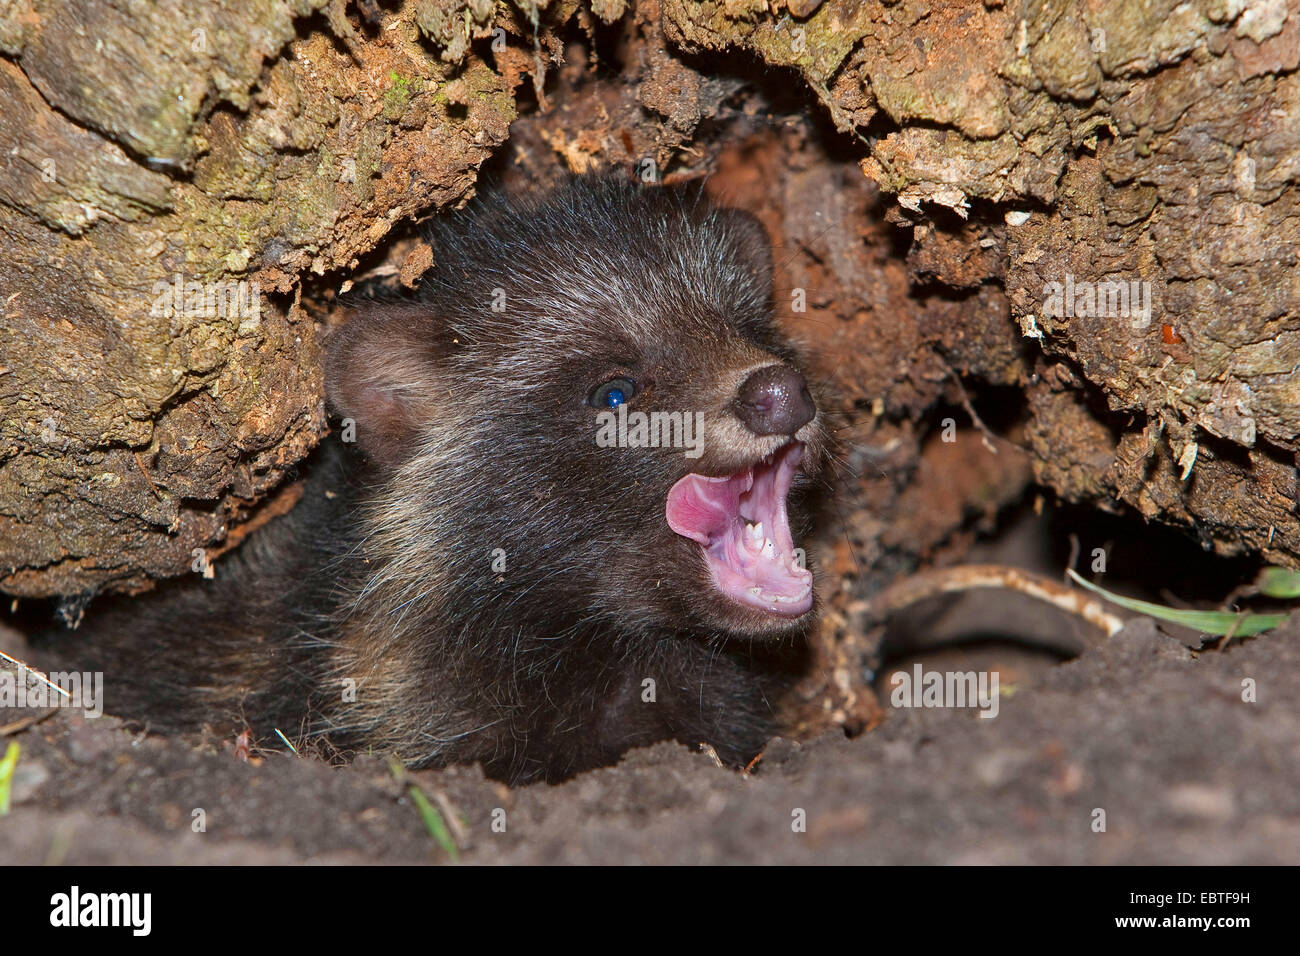 raccoon dog (Nyctereutes procyonoides), young raccoon dog yawning in tree hole, Germany Stock Photo